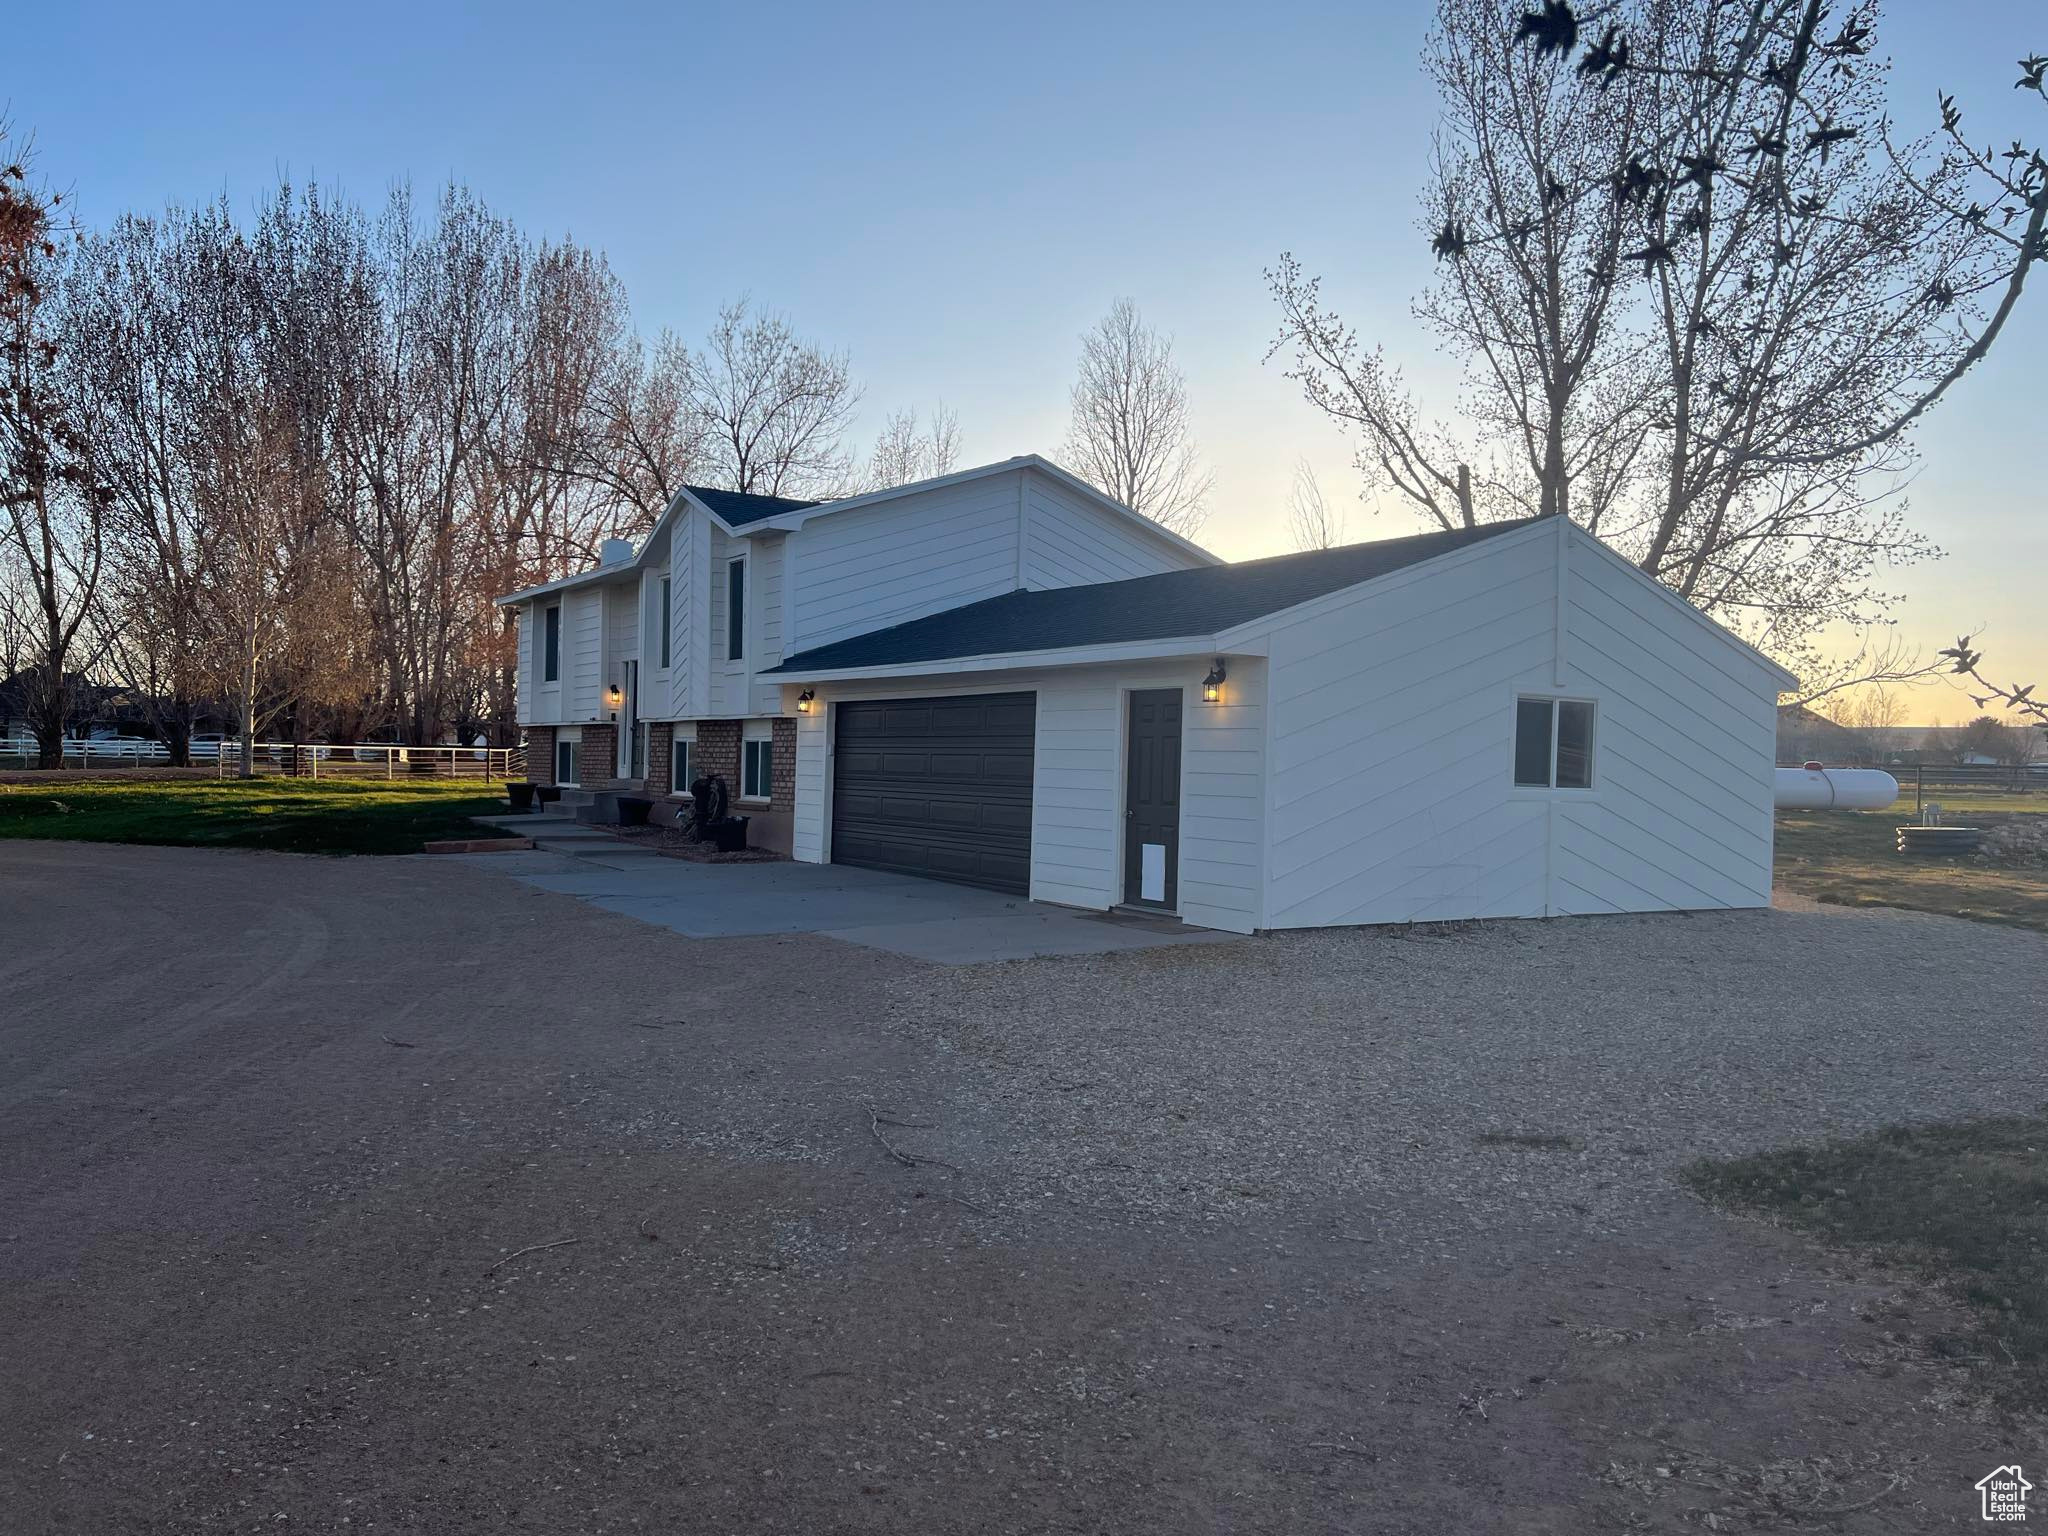 Property exterior at dusk with a garage